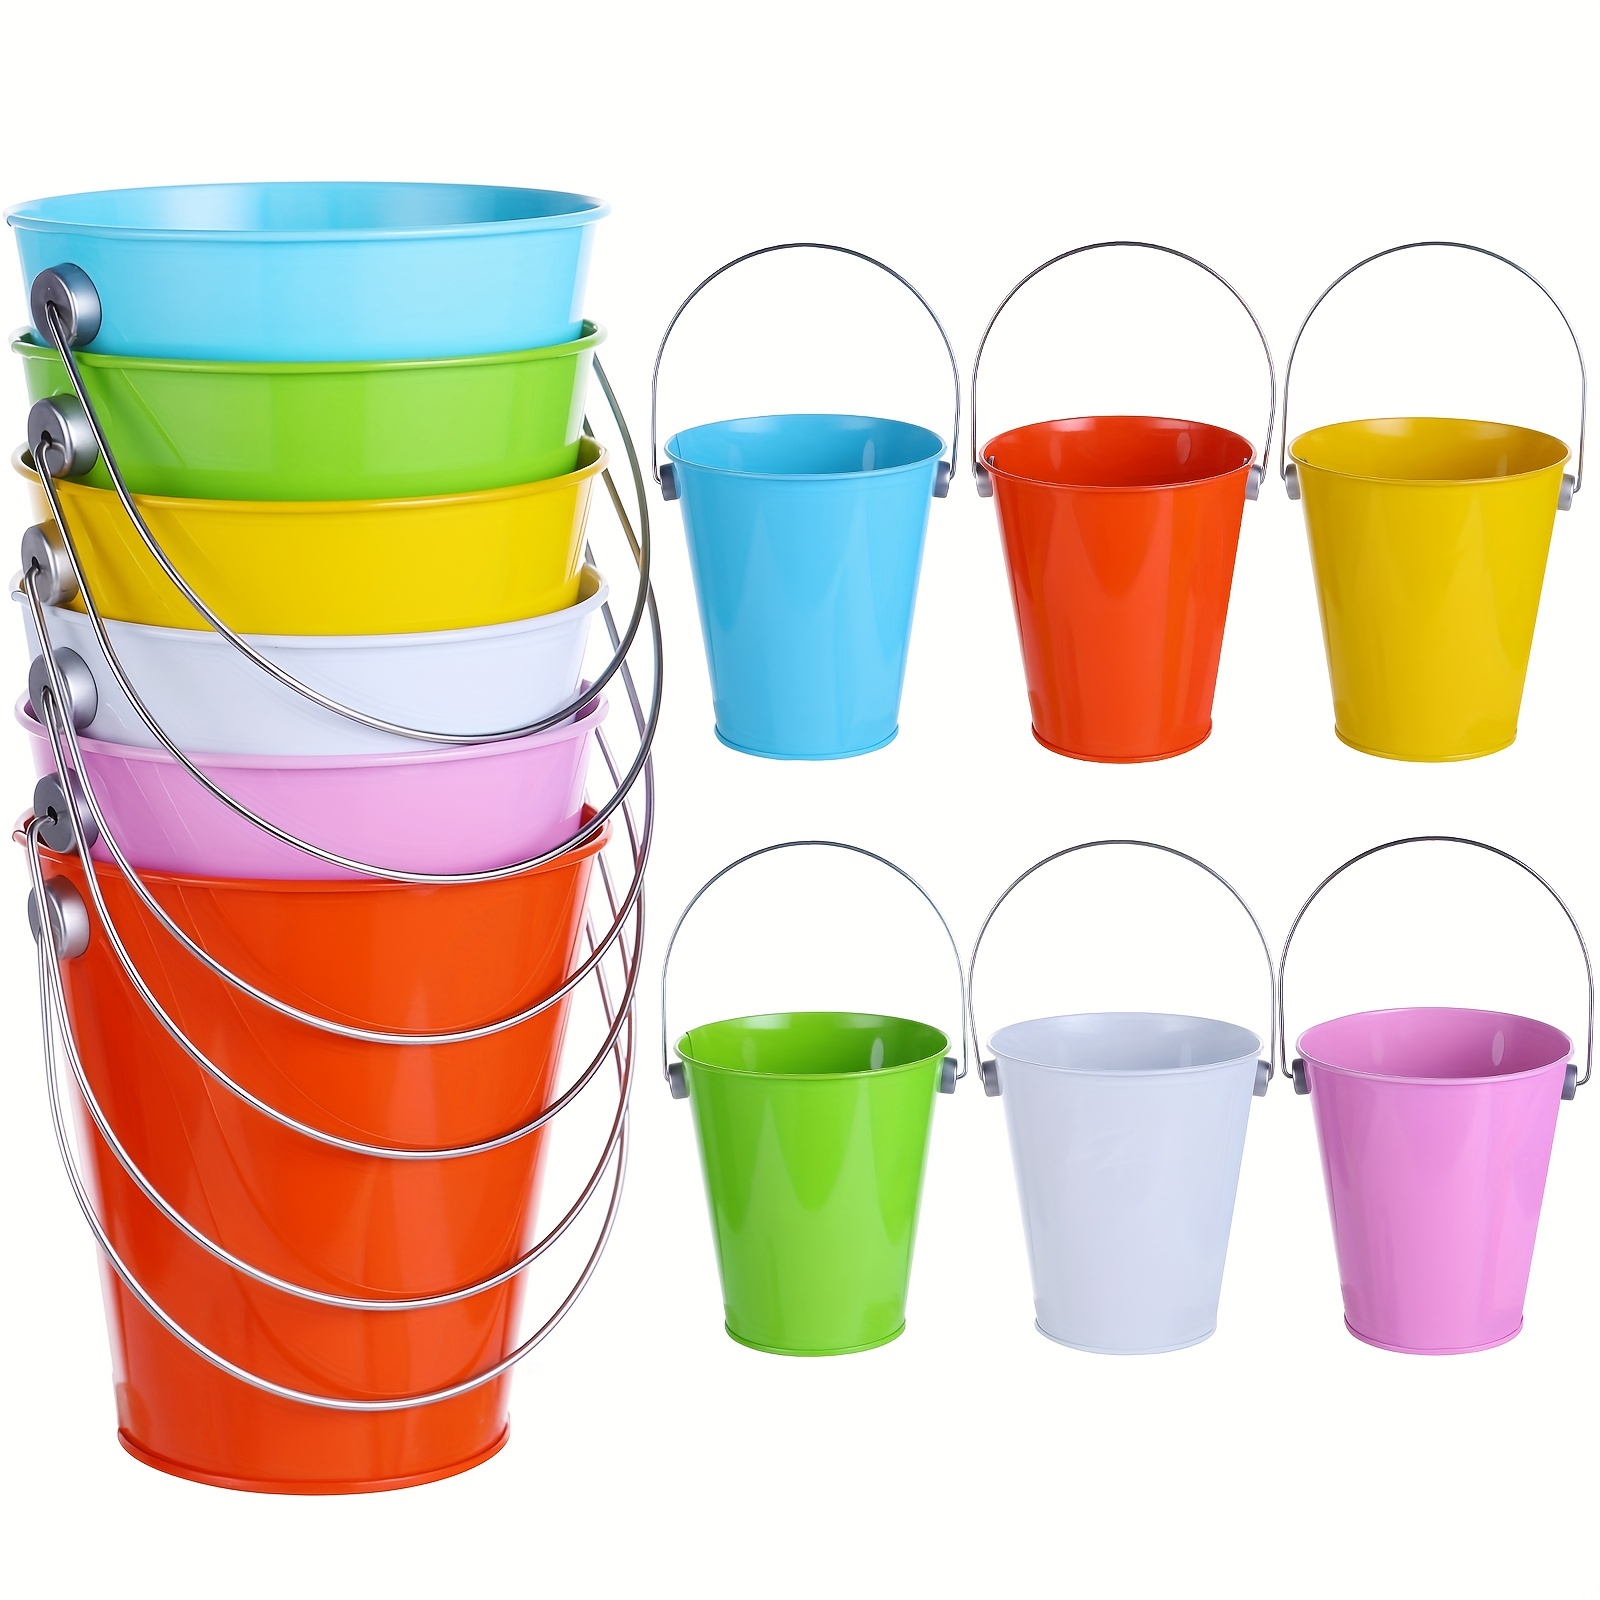 12pcs Metal Bucket With Handle Colorful Metal Bucket Colorful Zinc Plated  Bucket Beach Small Metal Bucket Mini Toy Bucket Green Plant Potted Bucket Co